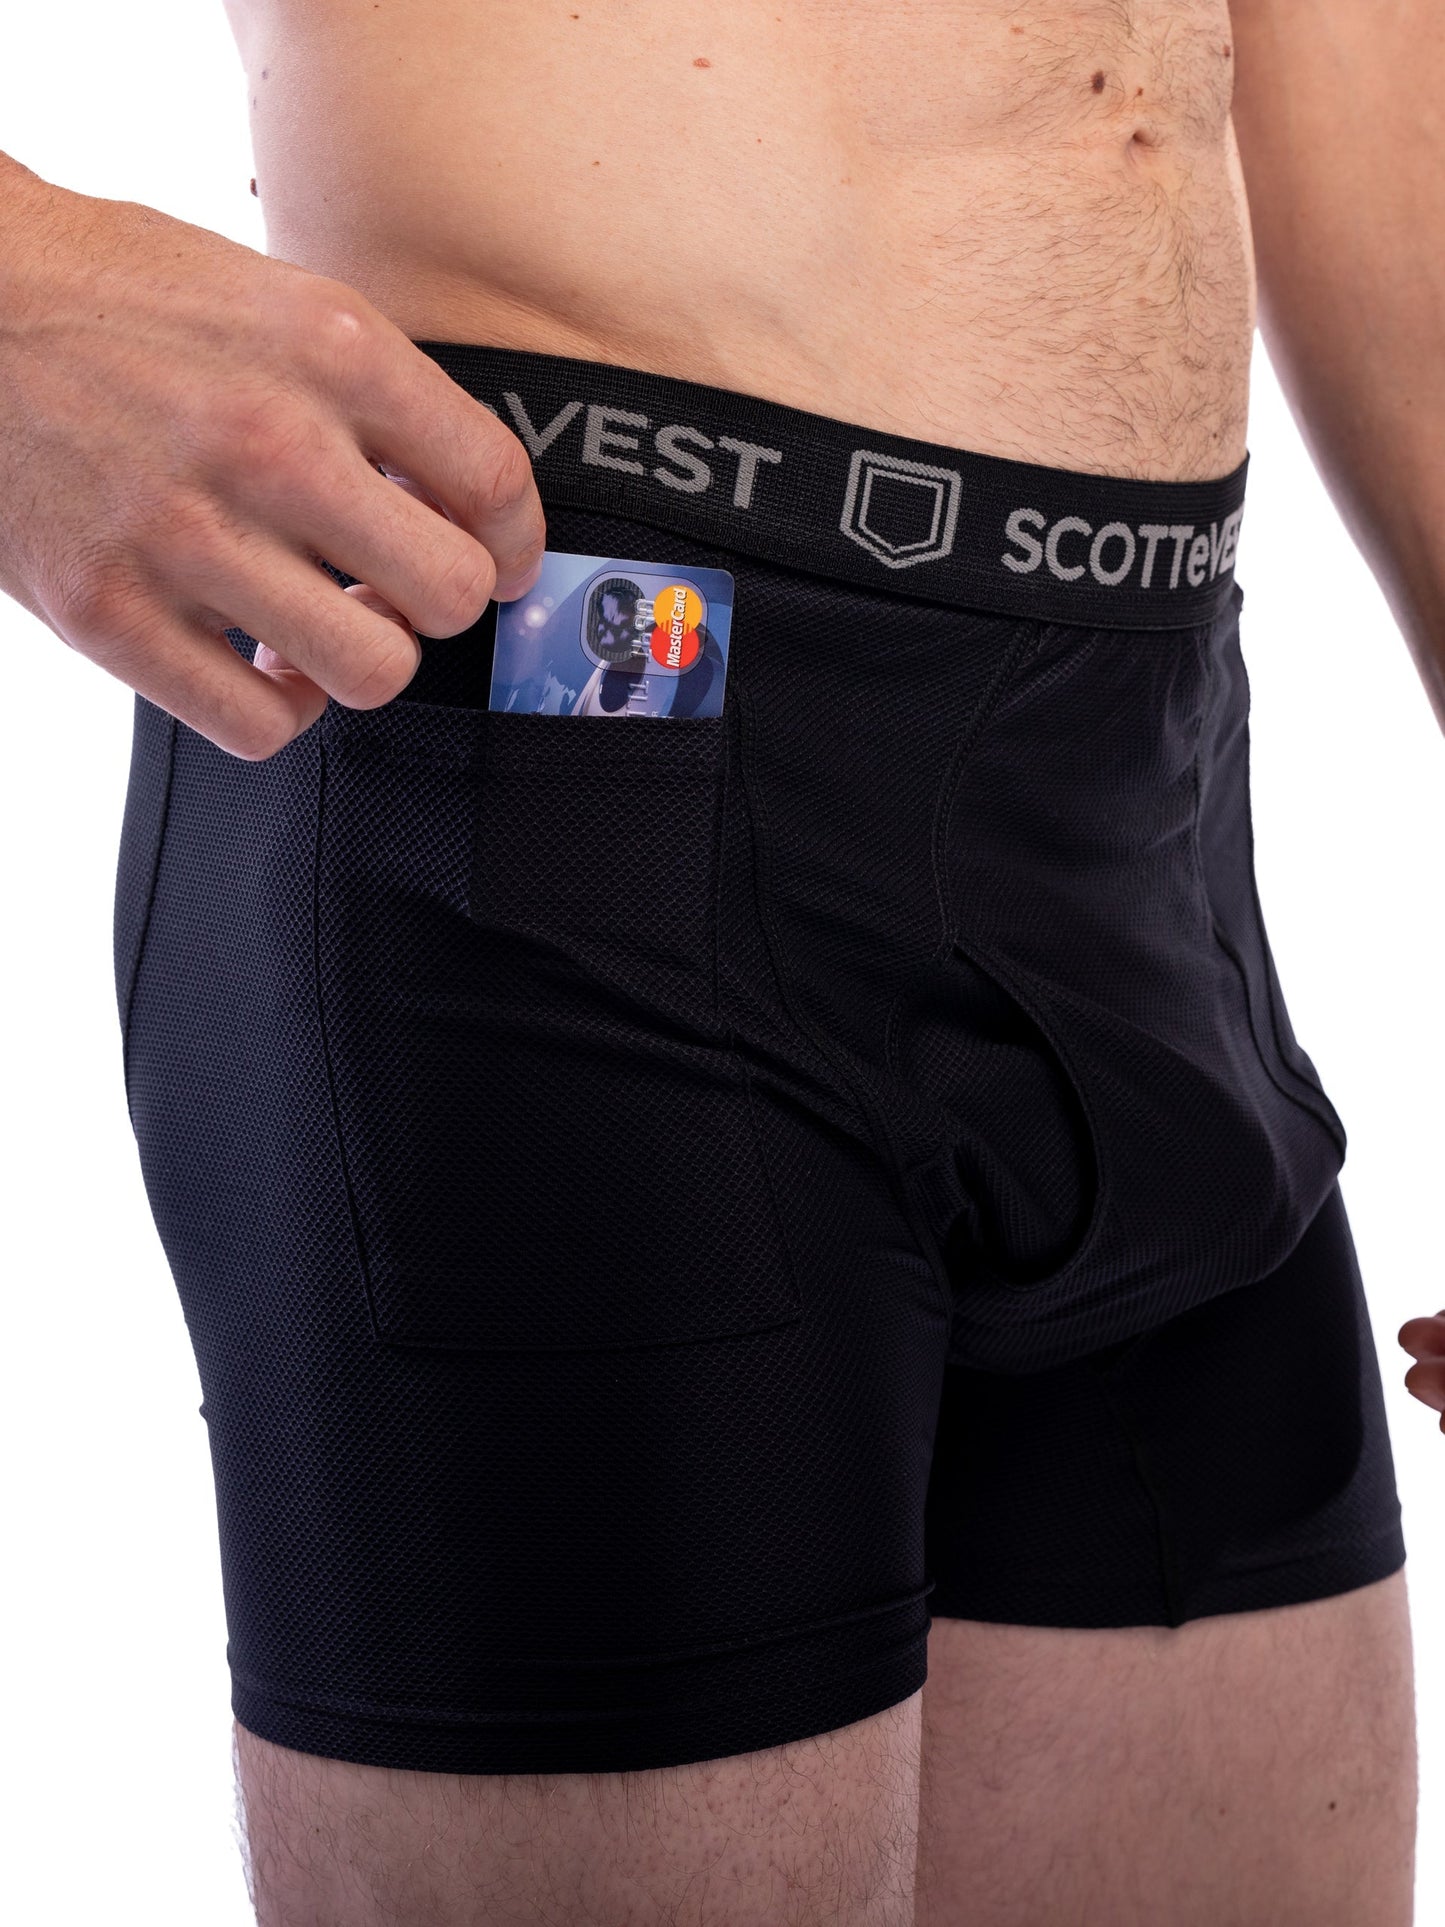 Boxer Briefs with Pockets - Underwear for your next Trip - Pockies